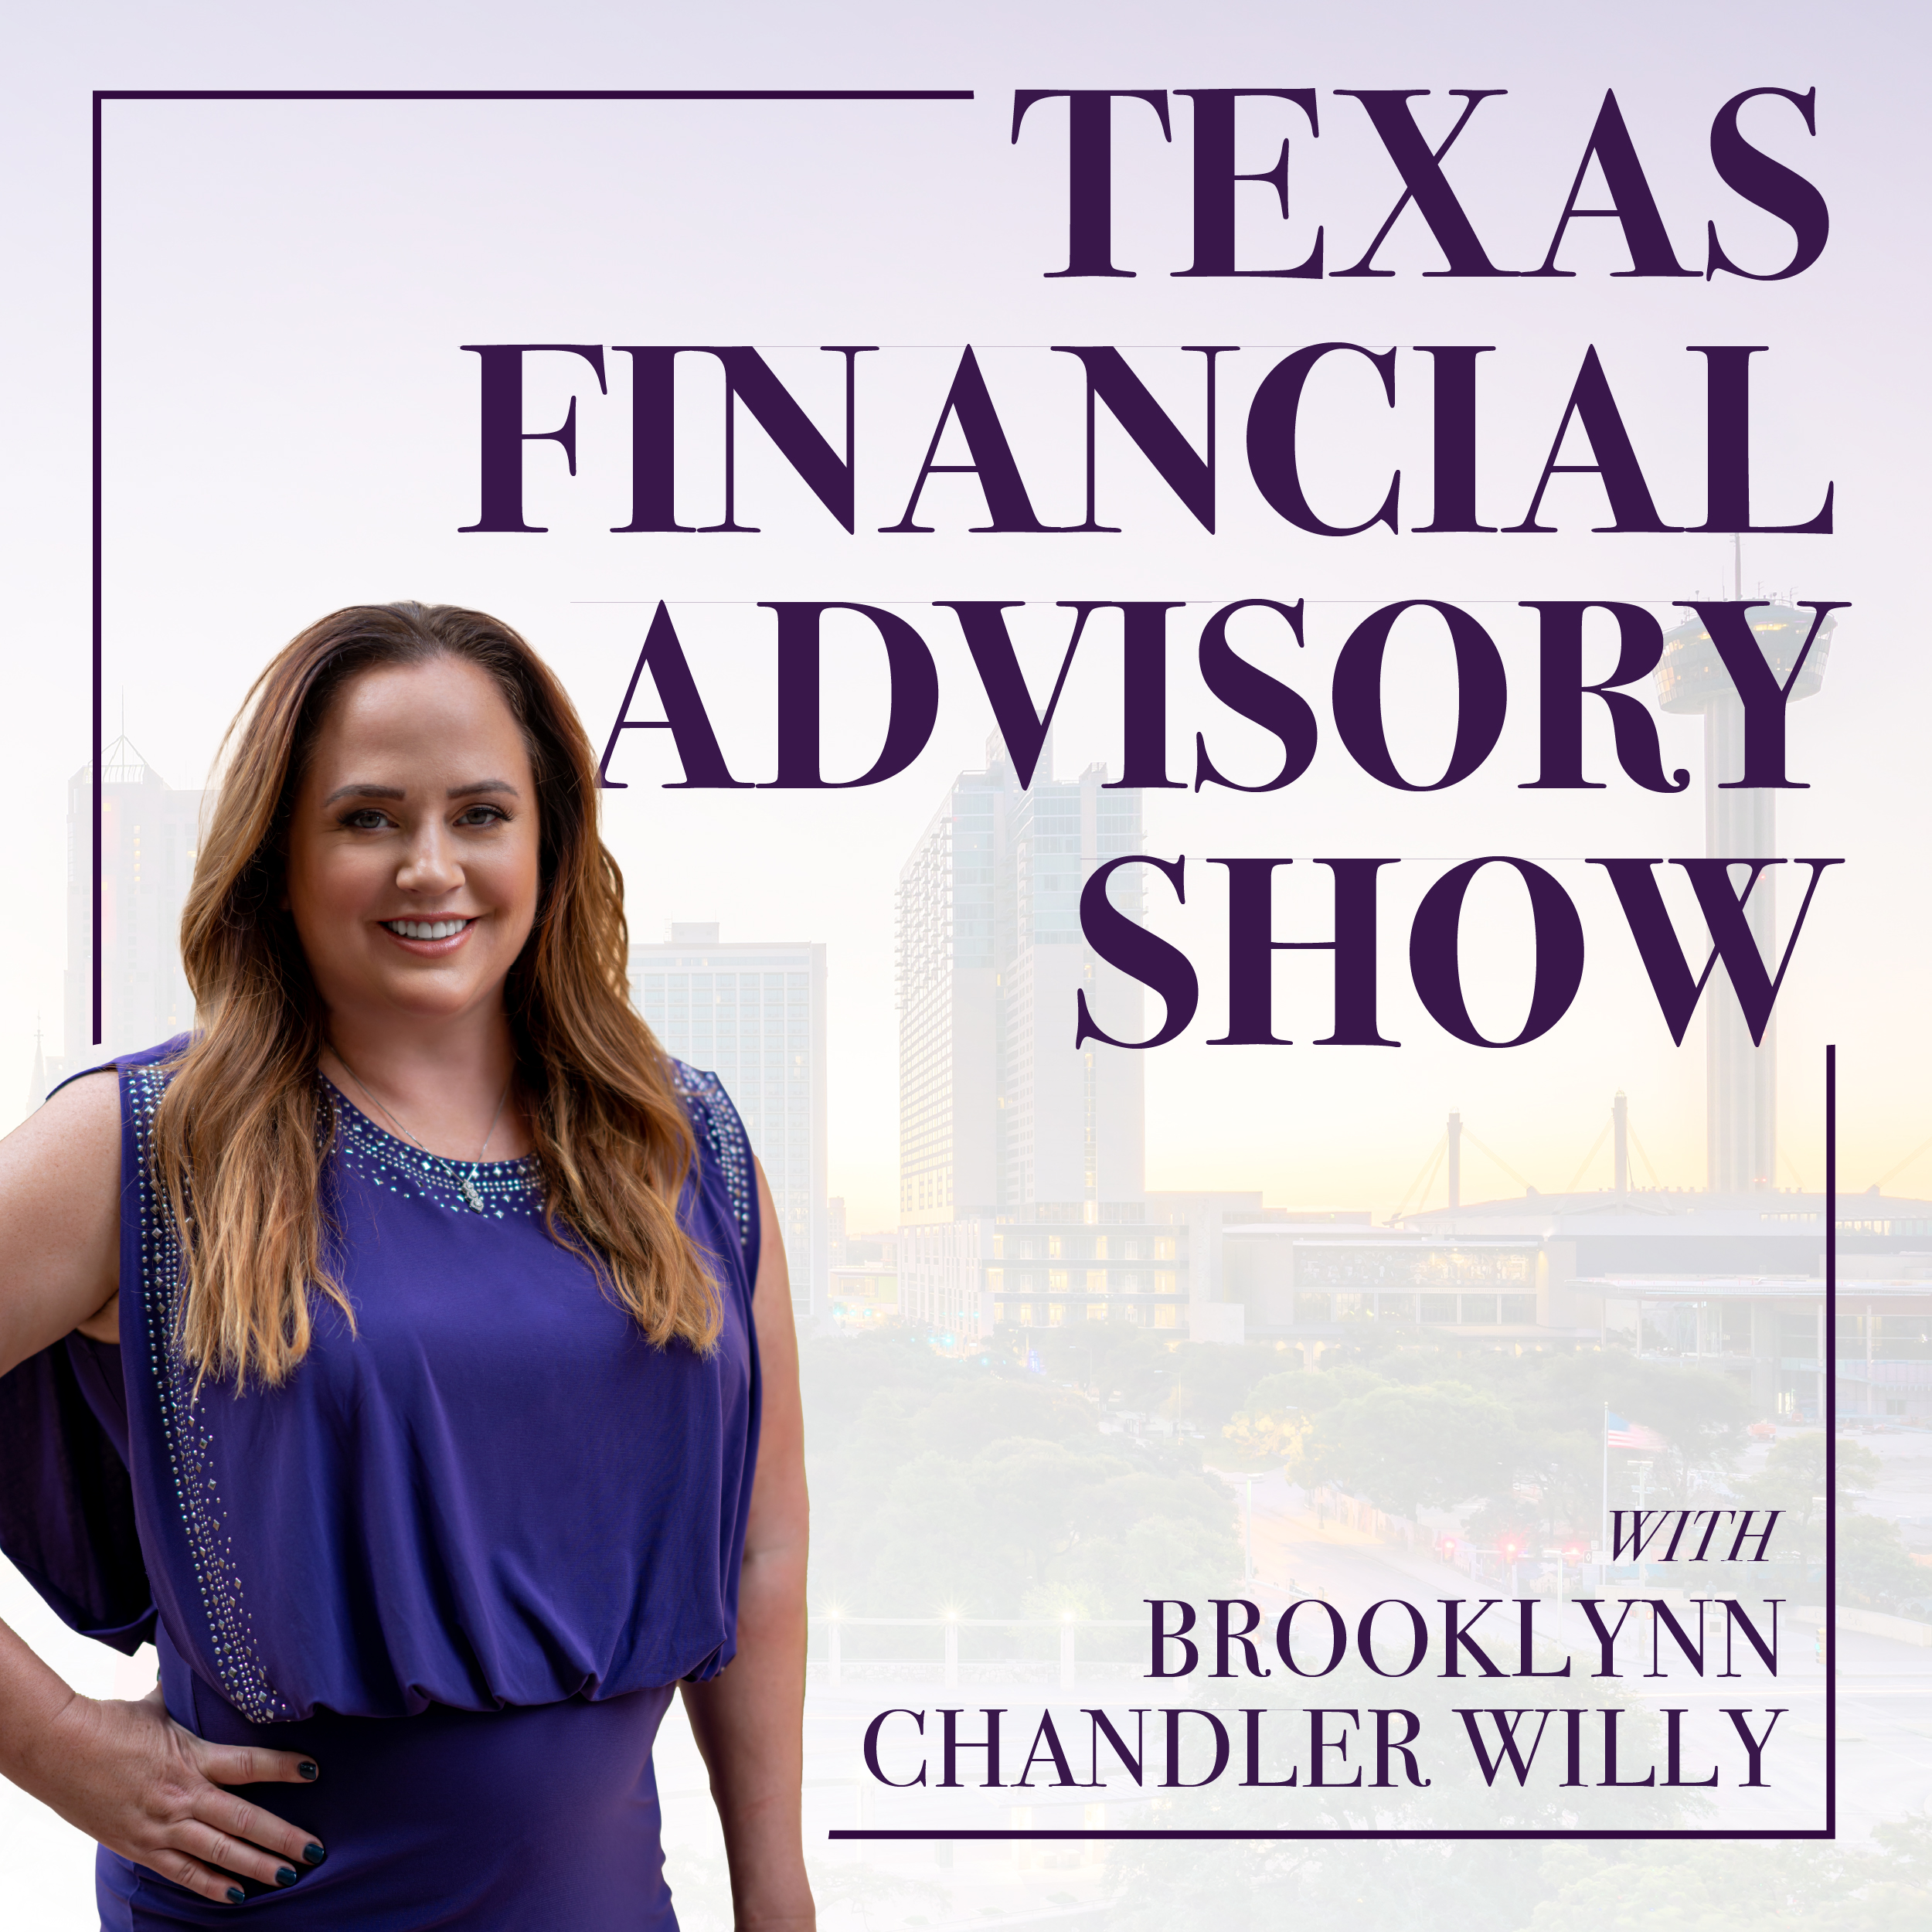 Texas Financial Advisory Group This week Brooklynn and her team discuss College Planning and share some great client stories.